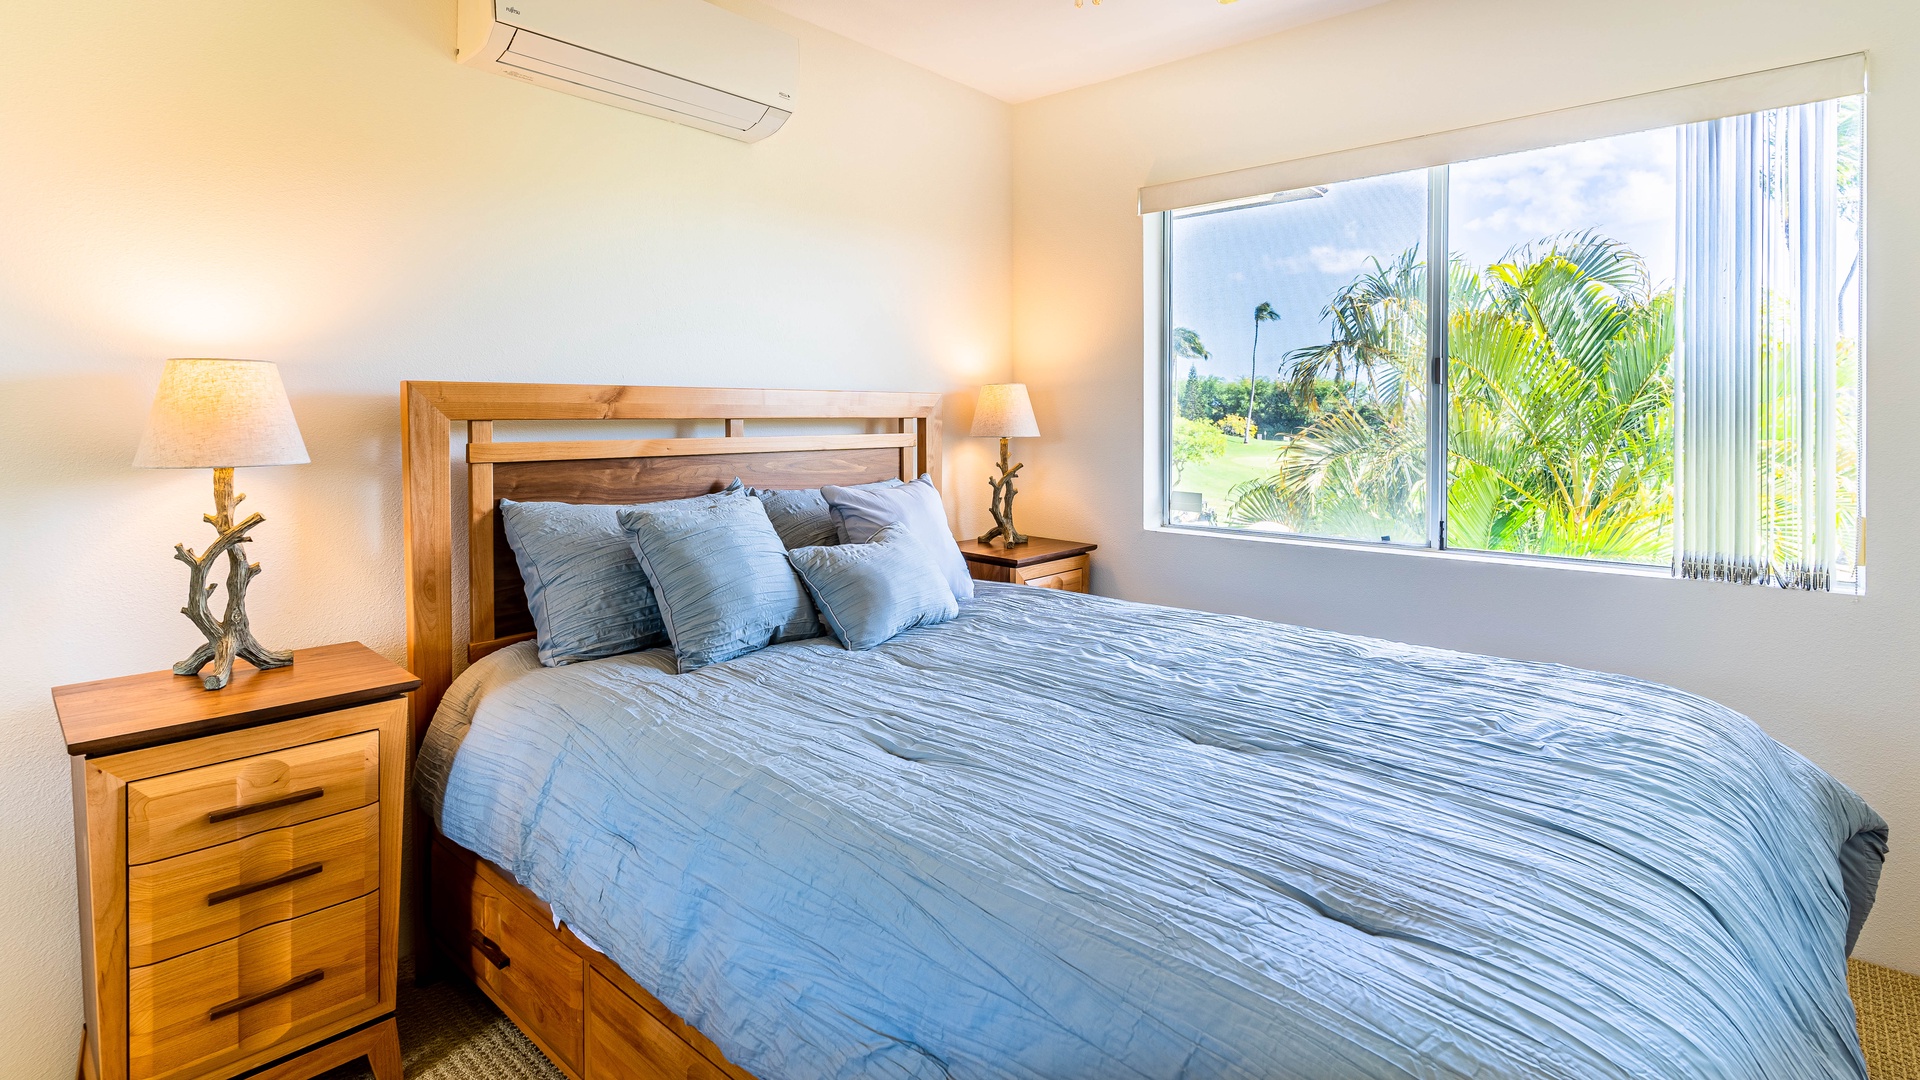 Kapolei Vacation Rentals, Fairways at Ko Olina 20G - The second guest bedroom with soft and luxurious bedding.